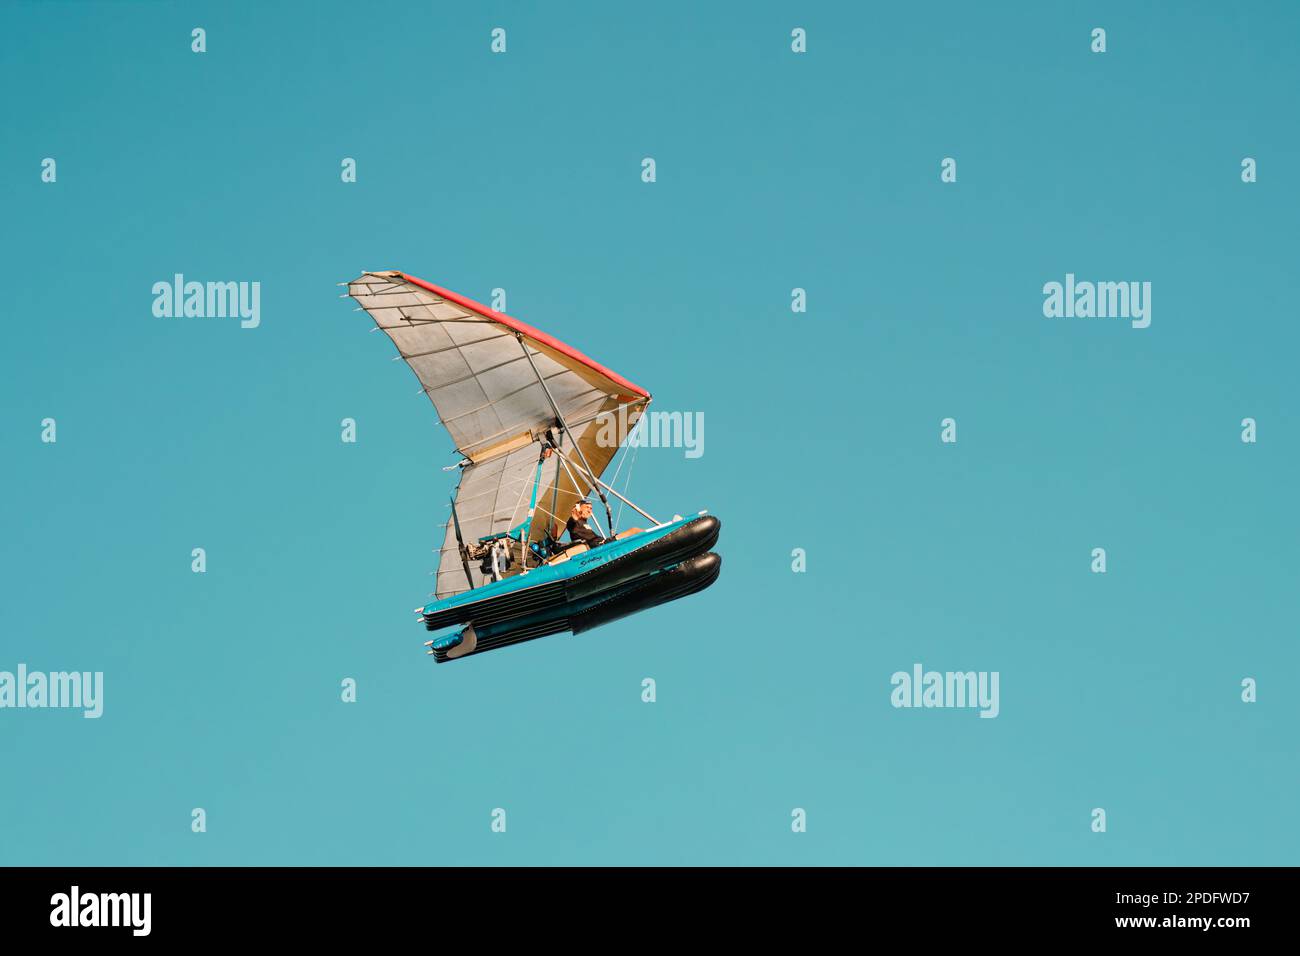 Senior man saying hello with the hand in a flying inflatable boat. Hang gliding extreme sport with clear blue sky in Miami Stock Photo